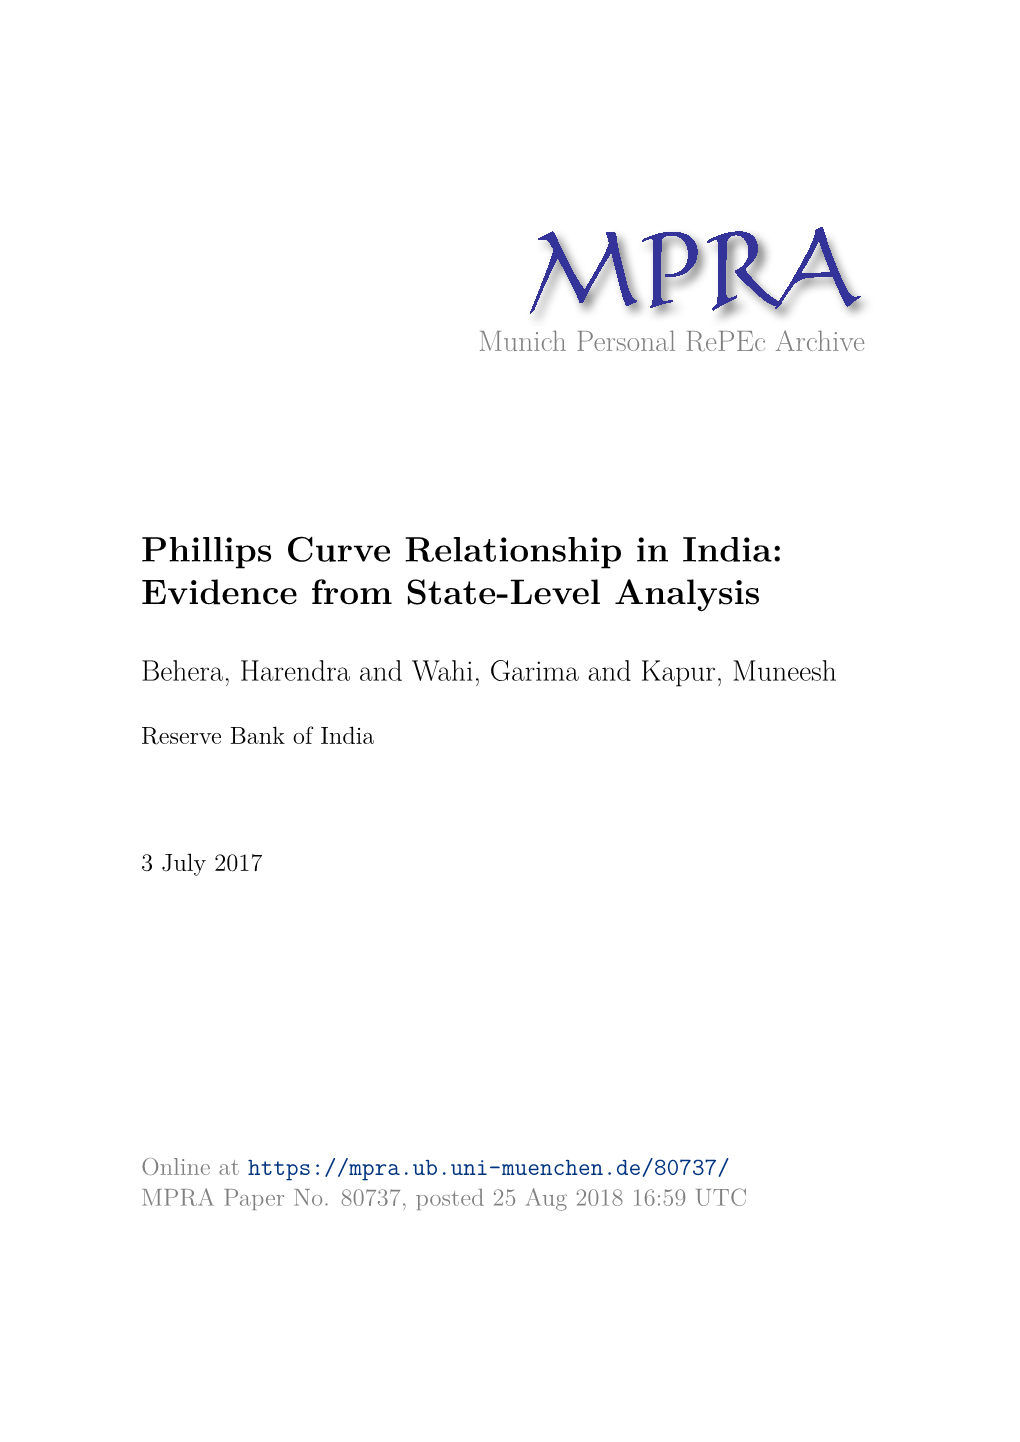 Phillips Curve Relationship in India: Evidence from State-Level Analysis